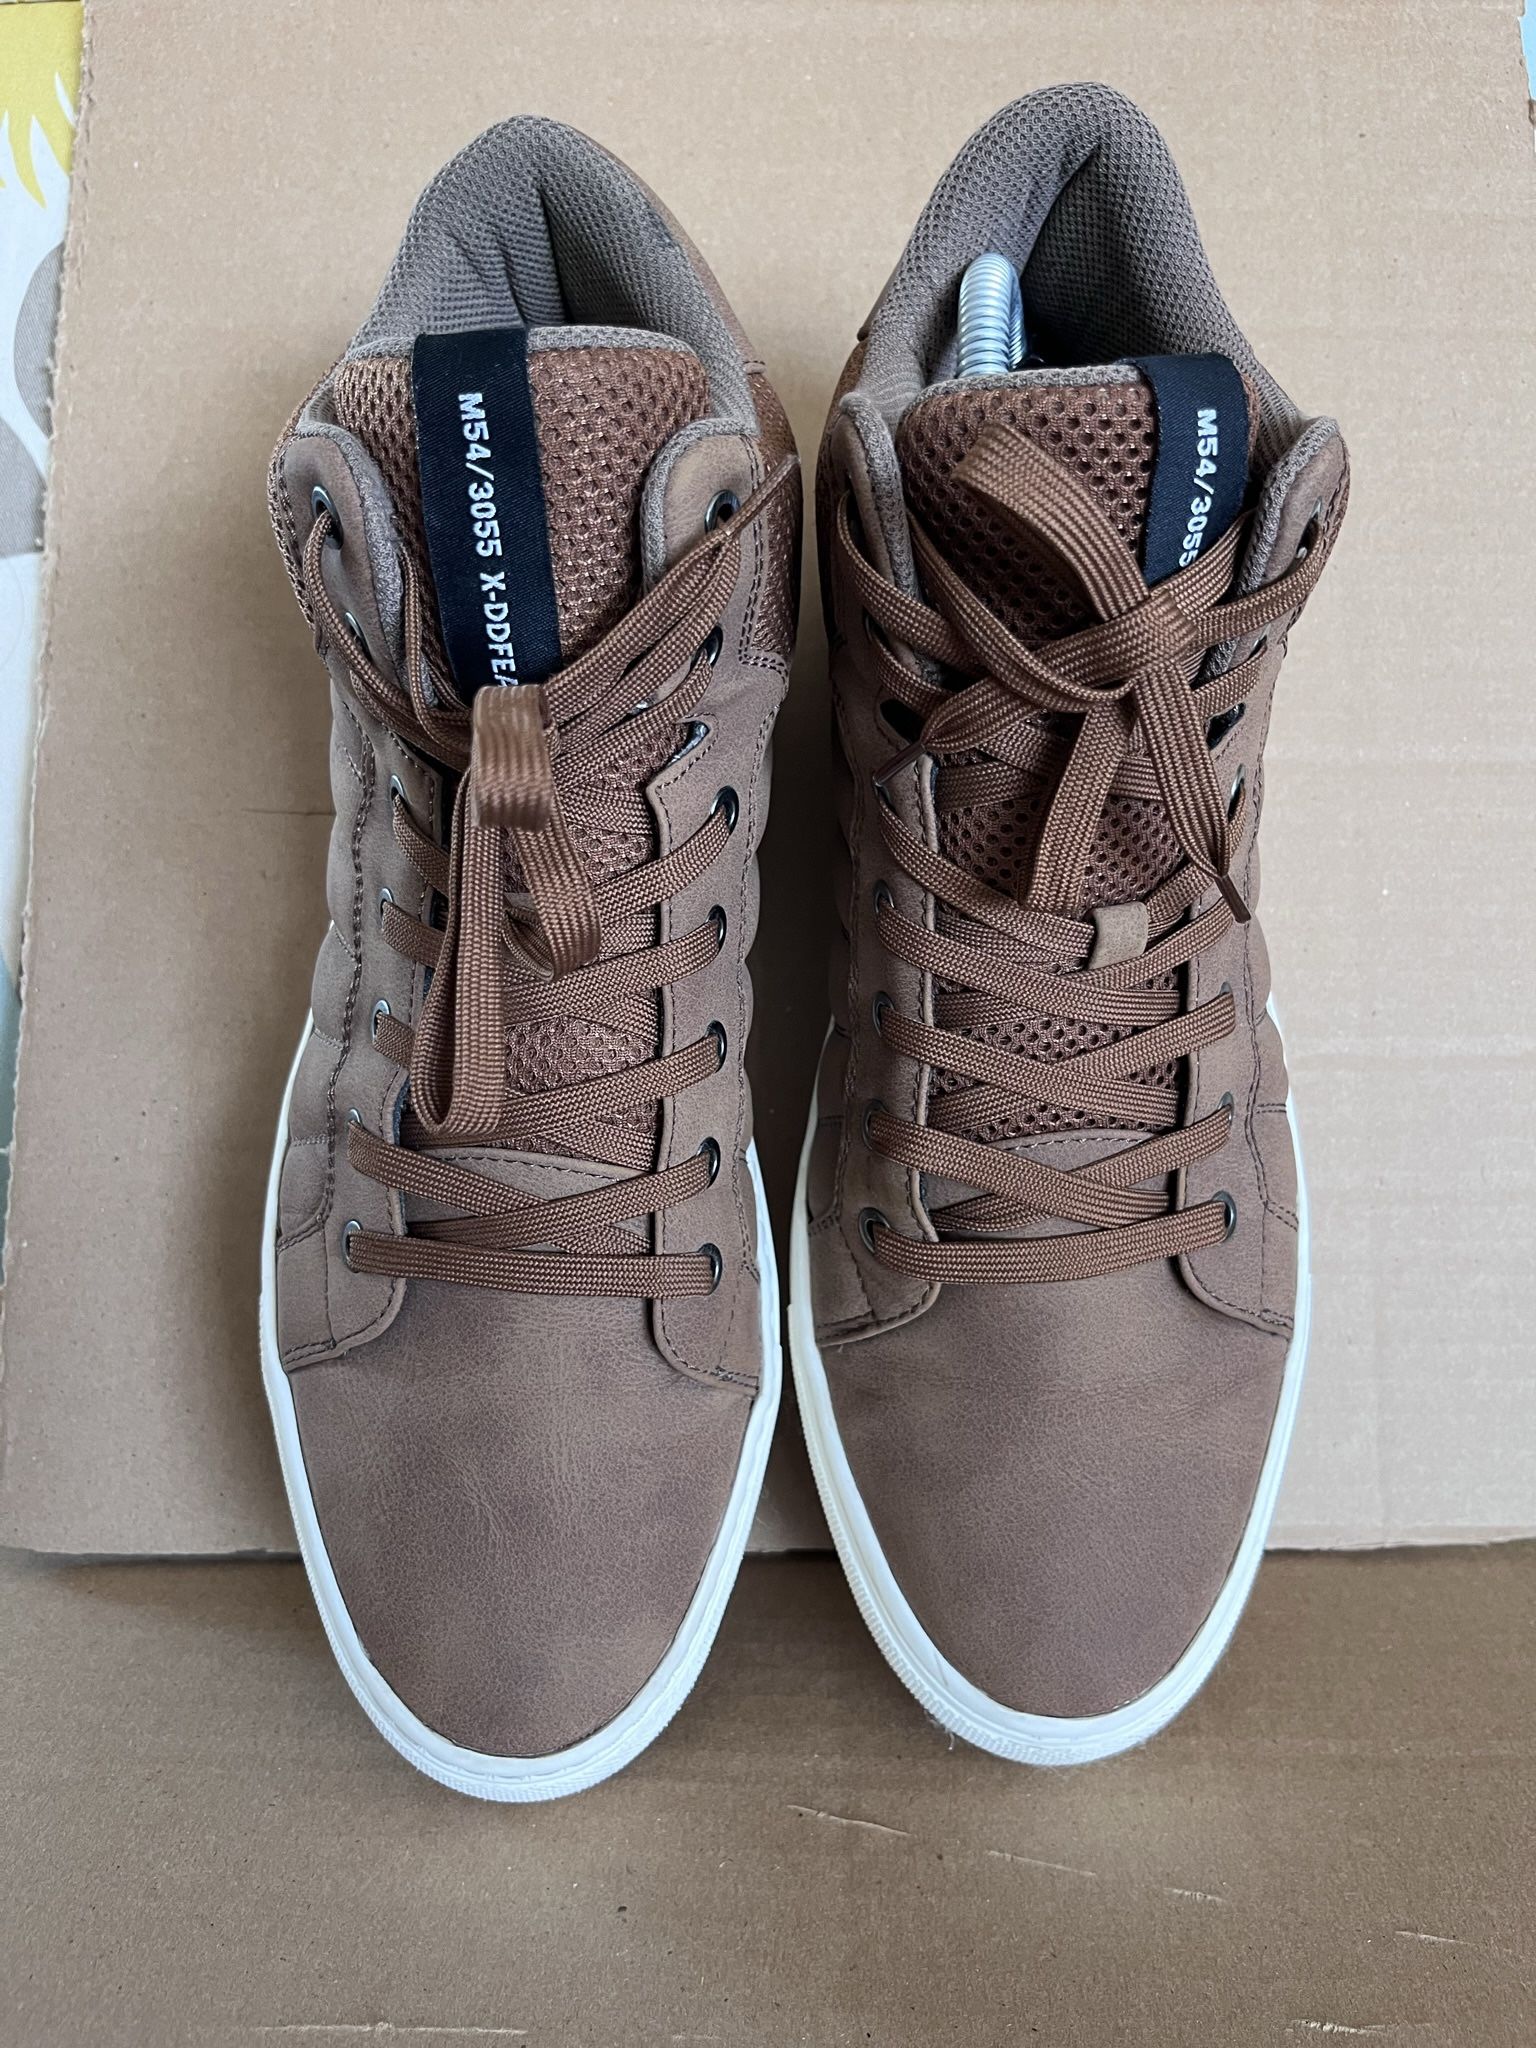 H&M Shoes Mens 10 High Tops Sneakers Brown Faux Leather Lace Up Casual  Comfort for Sale in Huntington Beach, CA - OfferUp